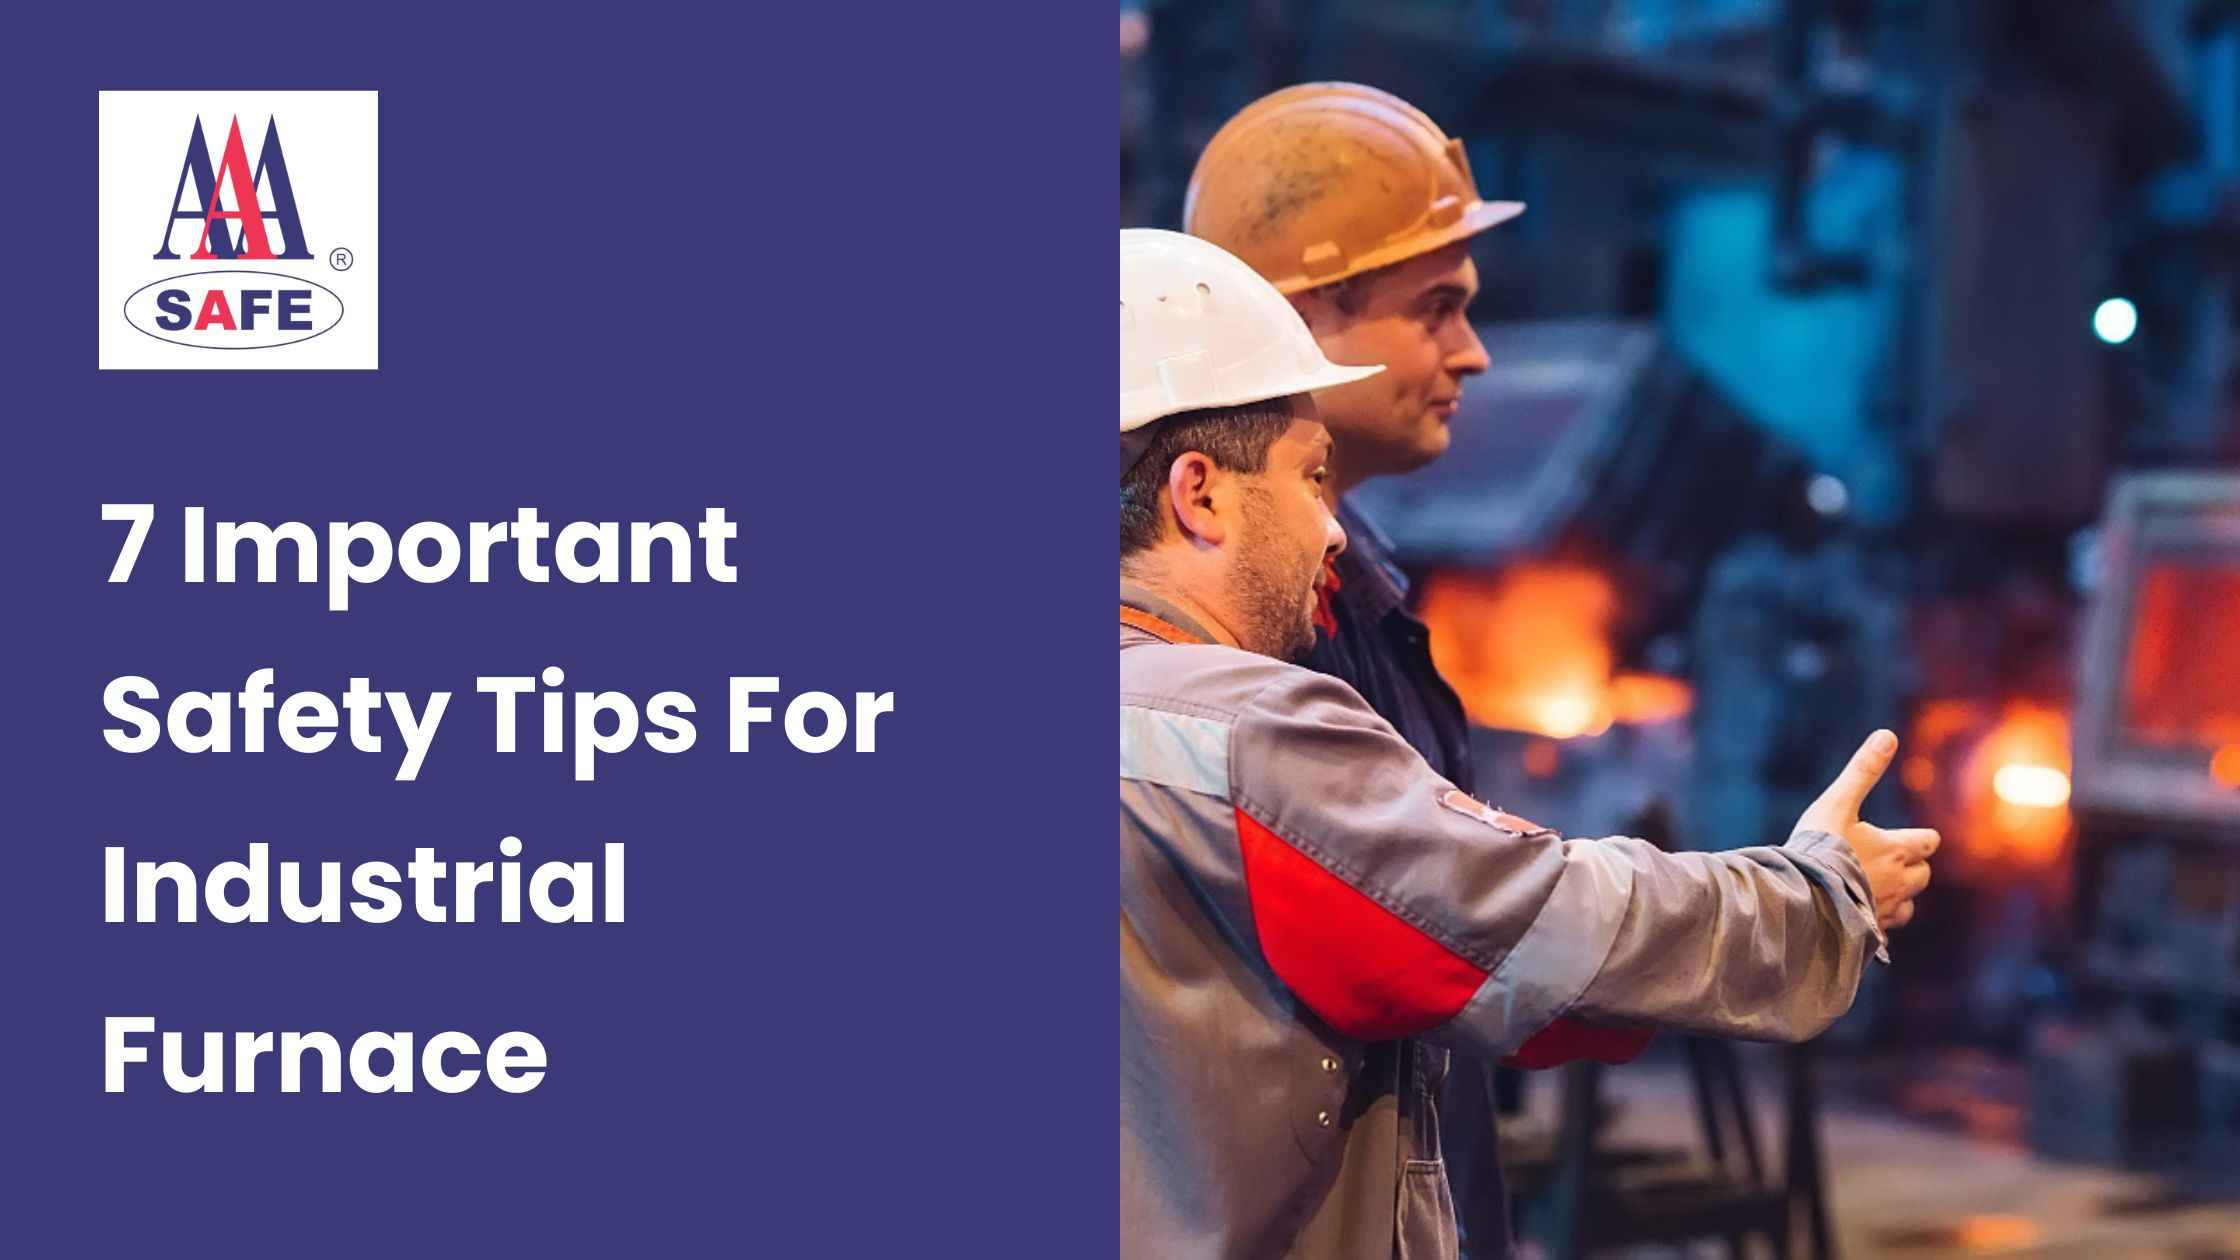 7 Important Safety Tips For Industrial Furnace